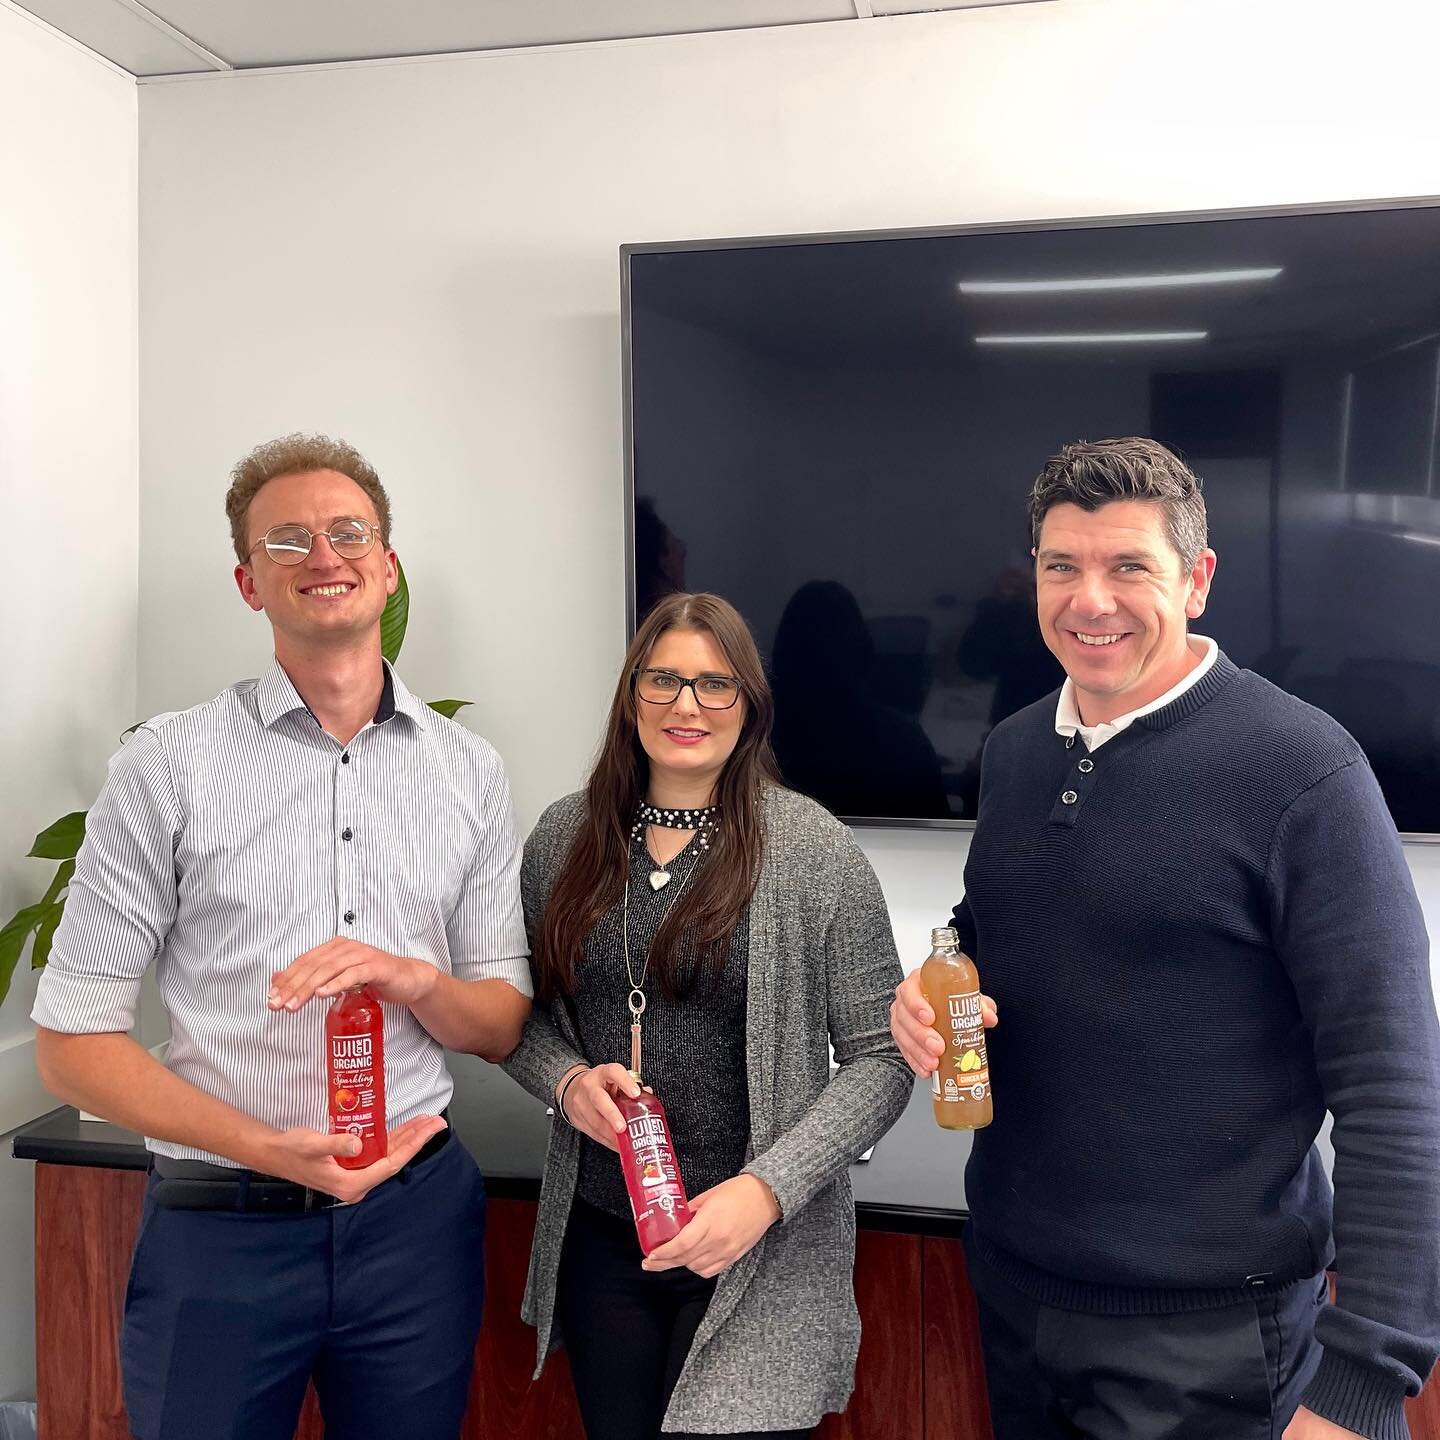 Our new partners @fullspectrumeducation staying refreshed with a couple delicious organic sparkling mineral waters in QLD @the.coffeecommune!

The Full Spectrum Education team definitely know a thing or two about educated decisions, choosing a low ca